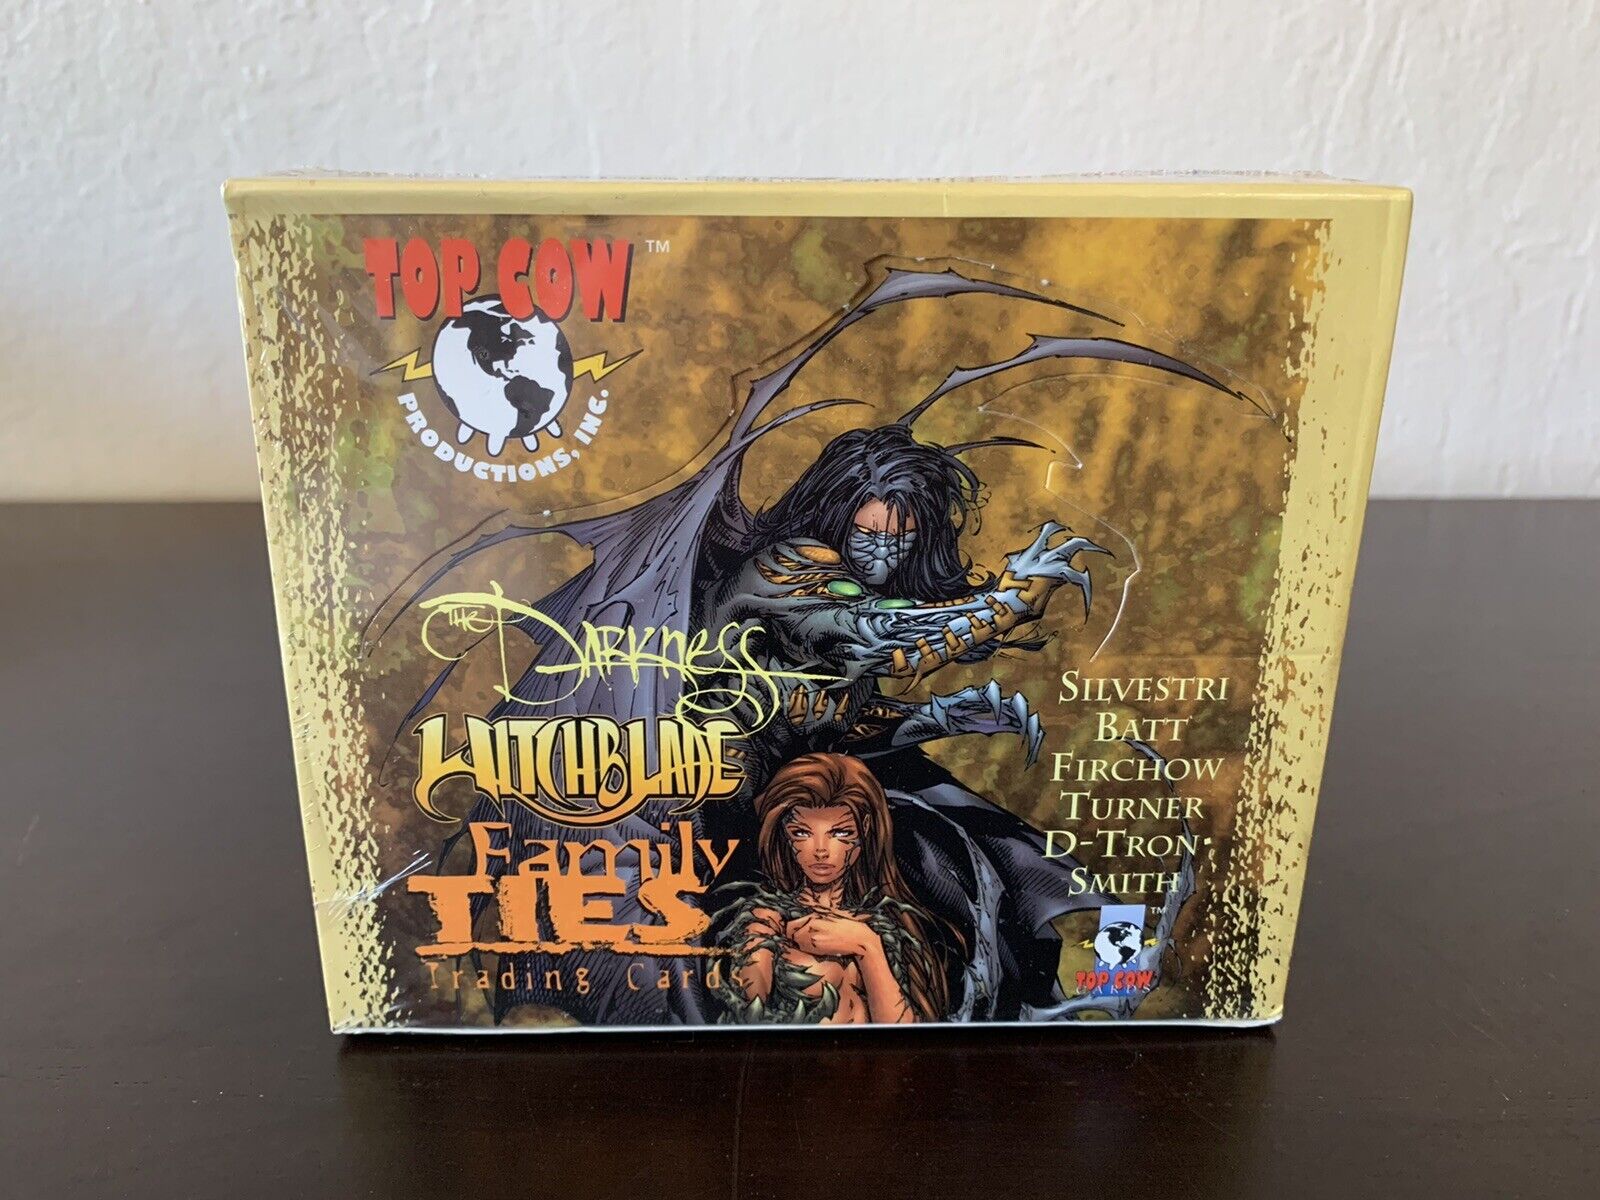 Darkness Witchblade Family Ties - Sealed Trading Card Box - Top Cow 1997